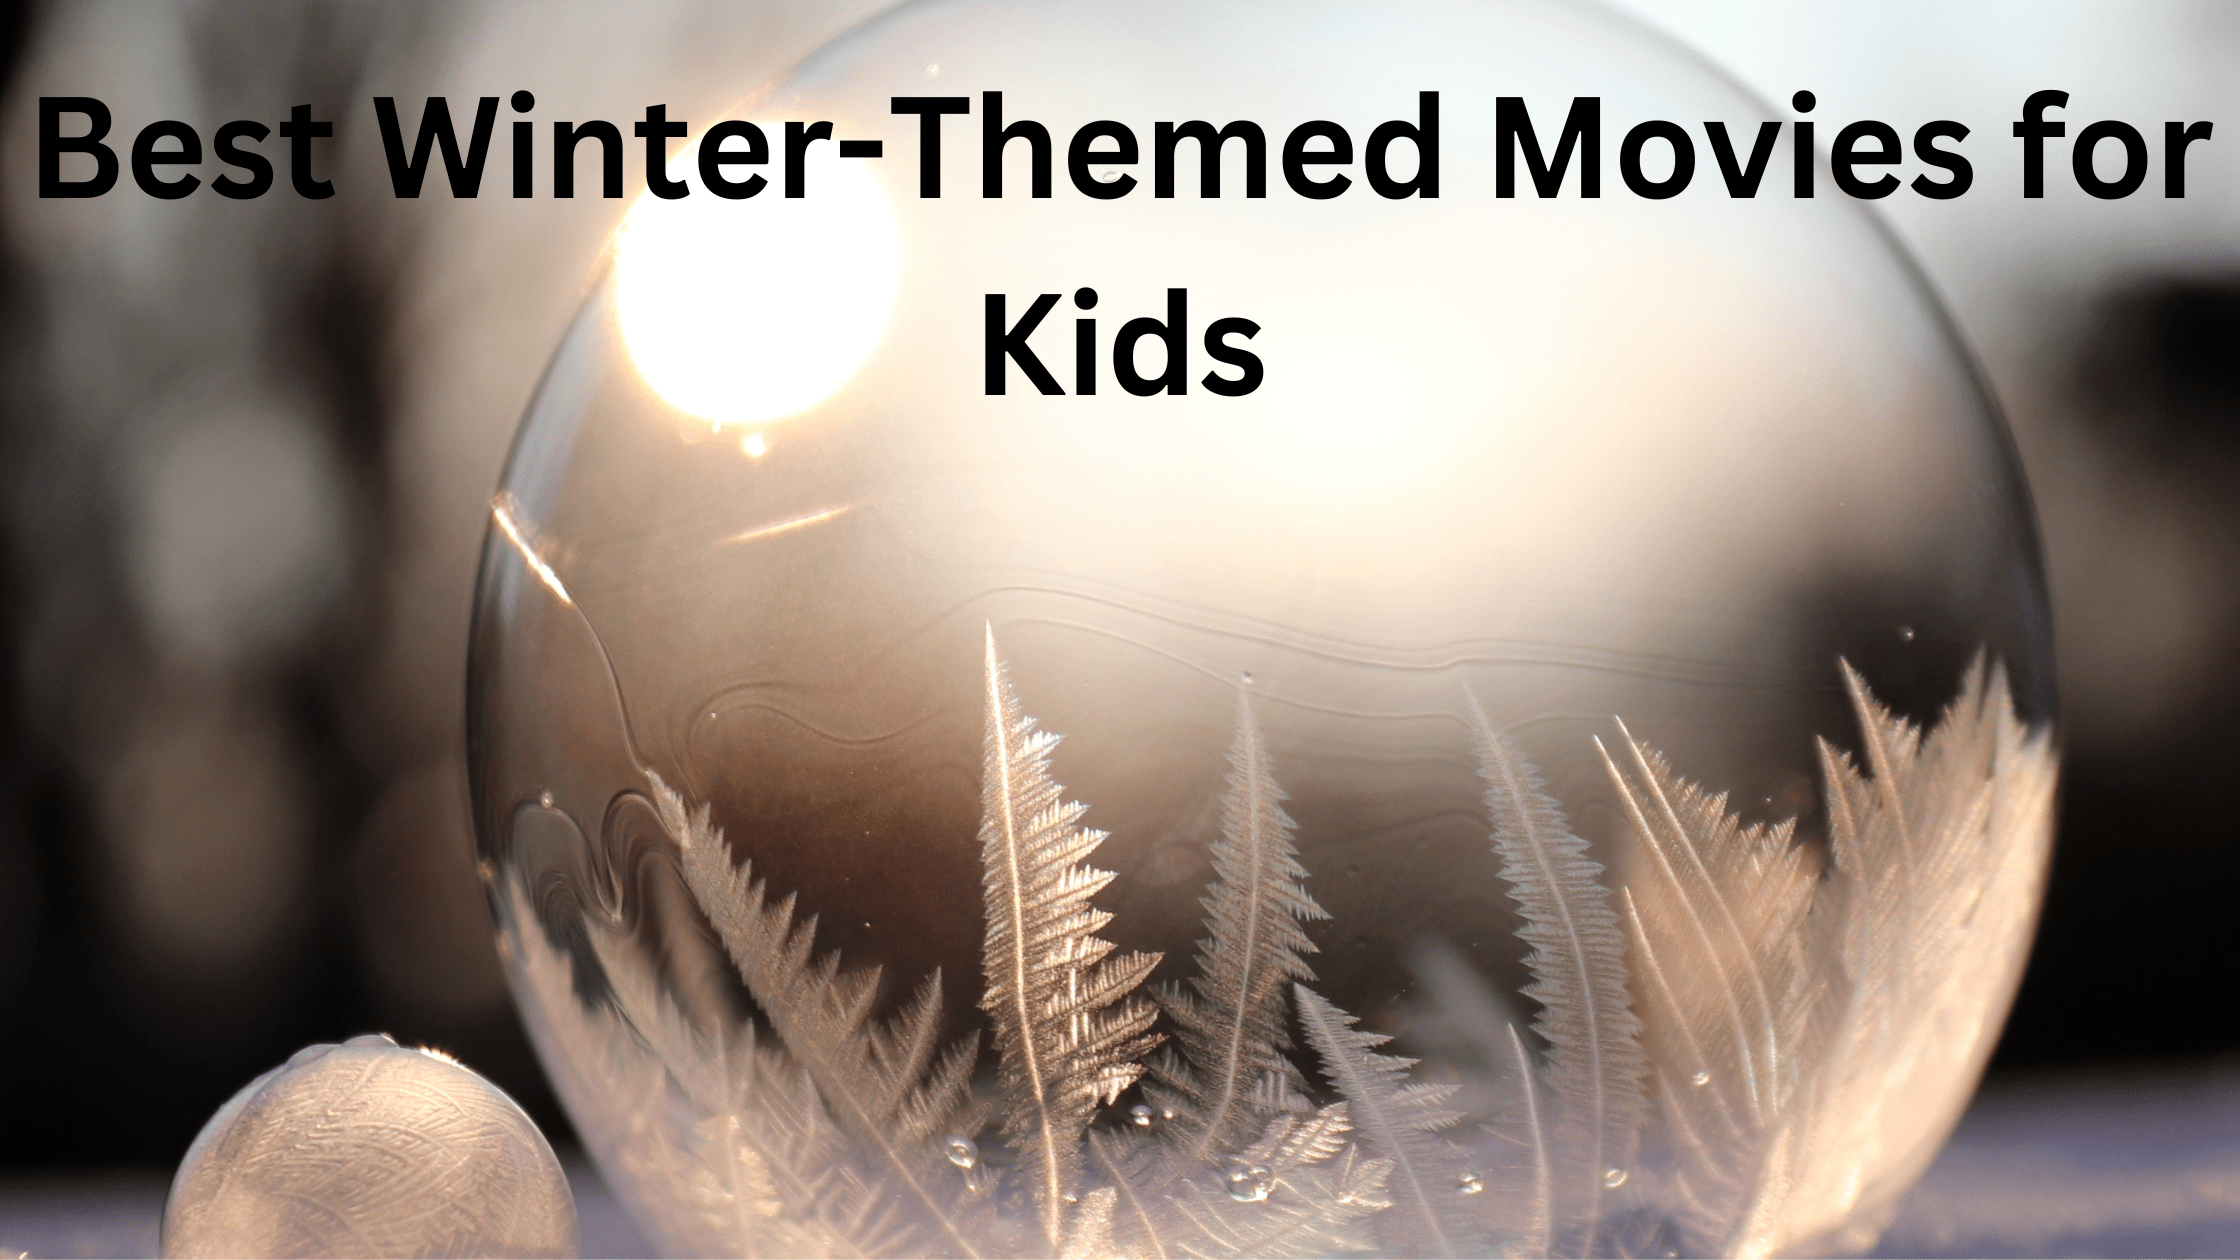 11 Best Winter-Themed Movies for Kids to Watch 1